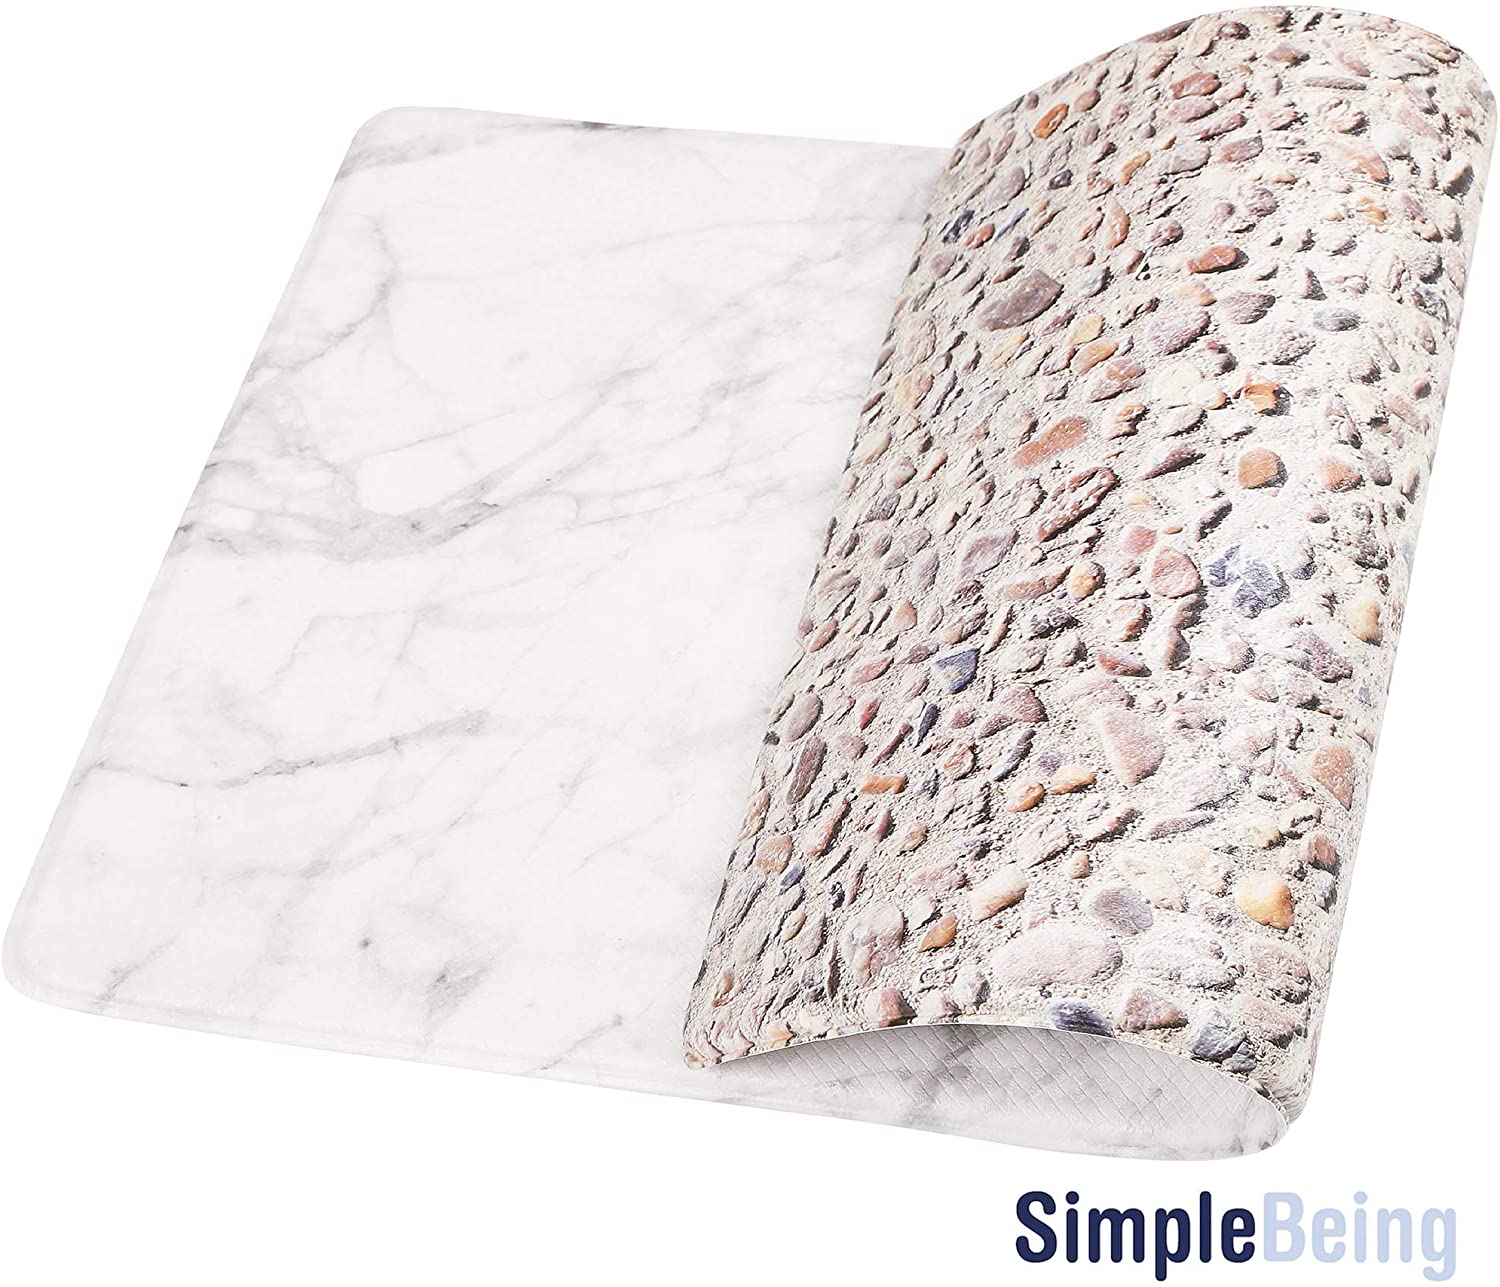 Simple Being Marble Anti-Fatigue Kitchen Floor Mat (32" x 17.5")